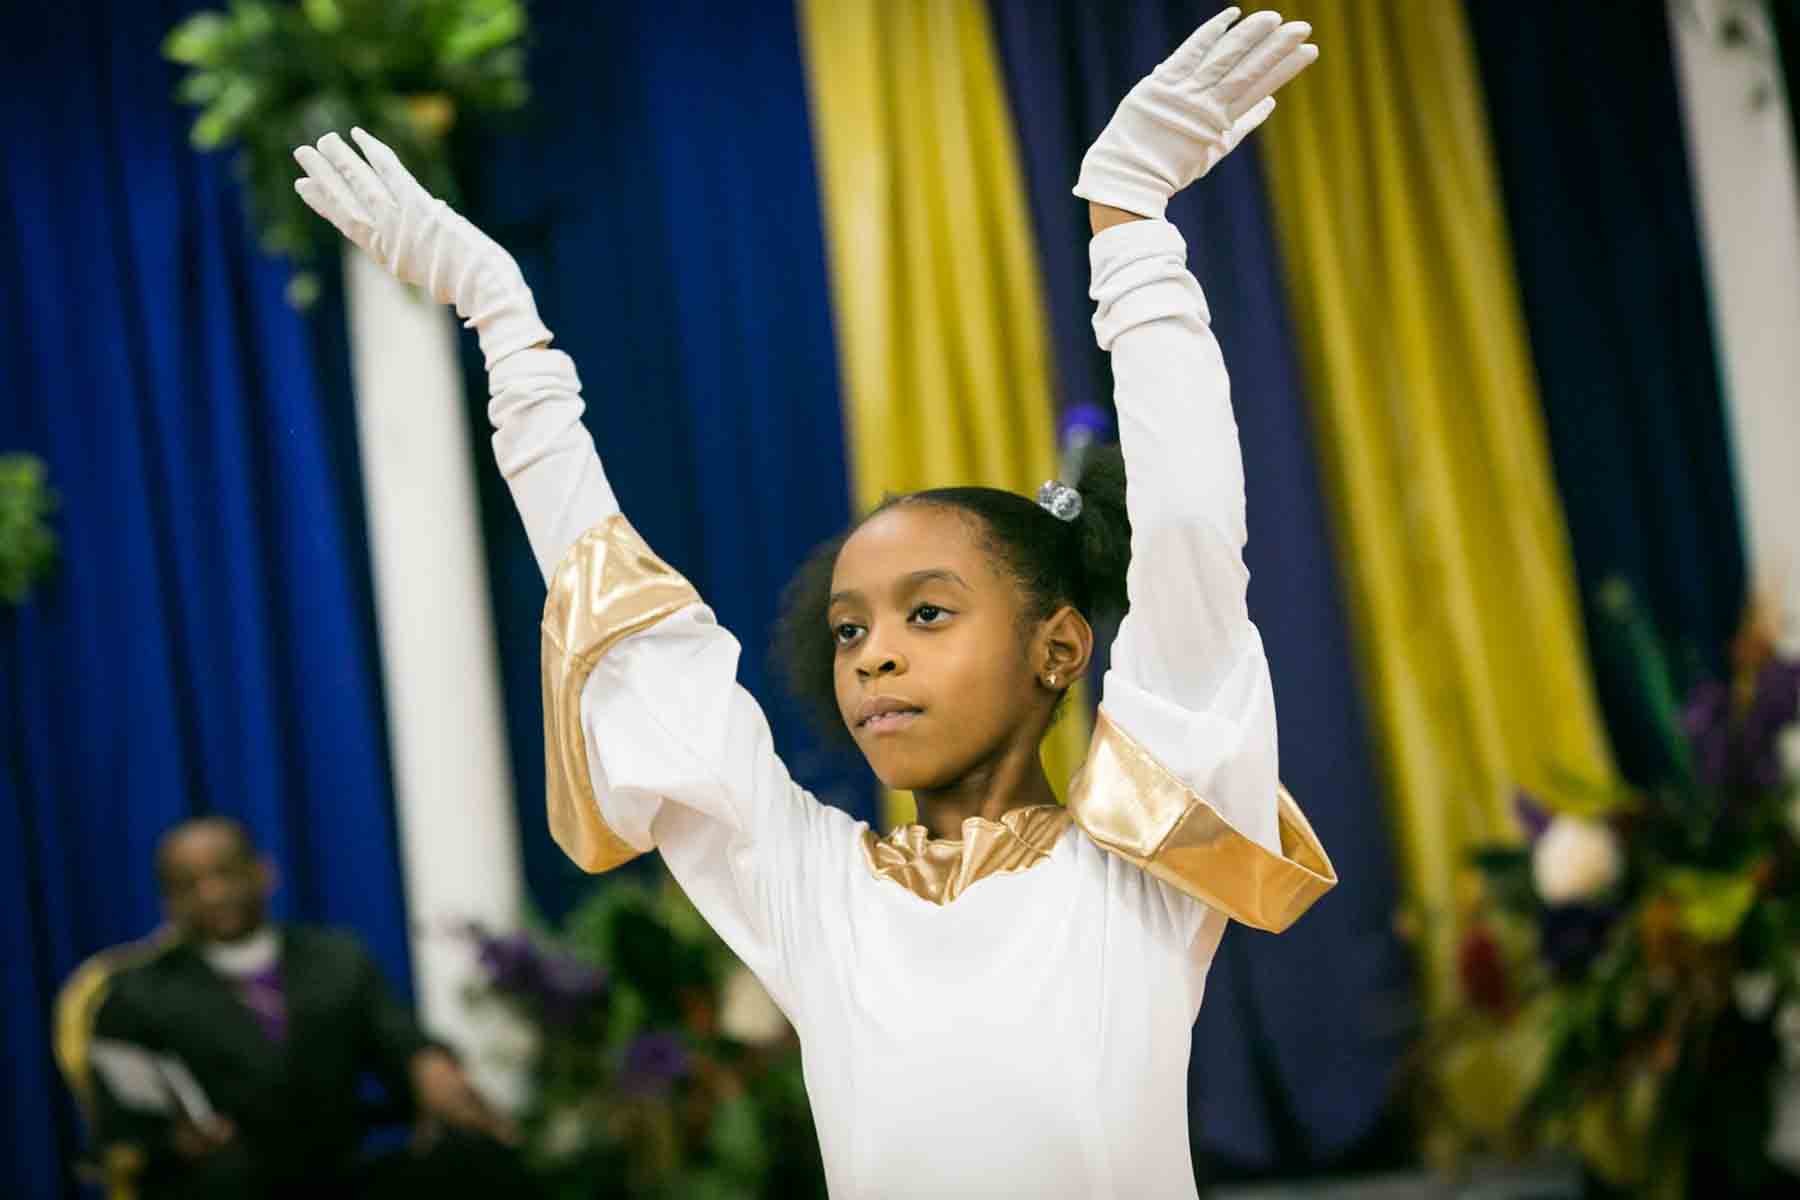 Little dancer wearing white outfit and long white gloves with hands in the air